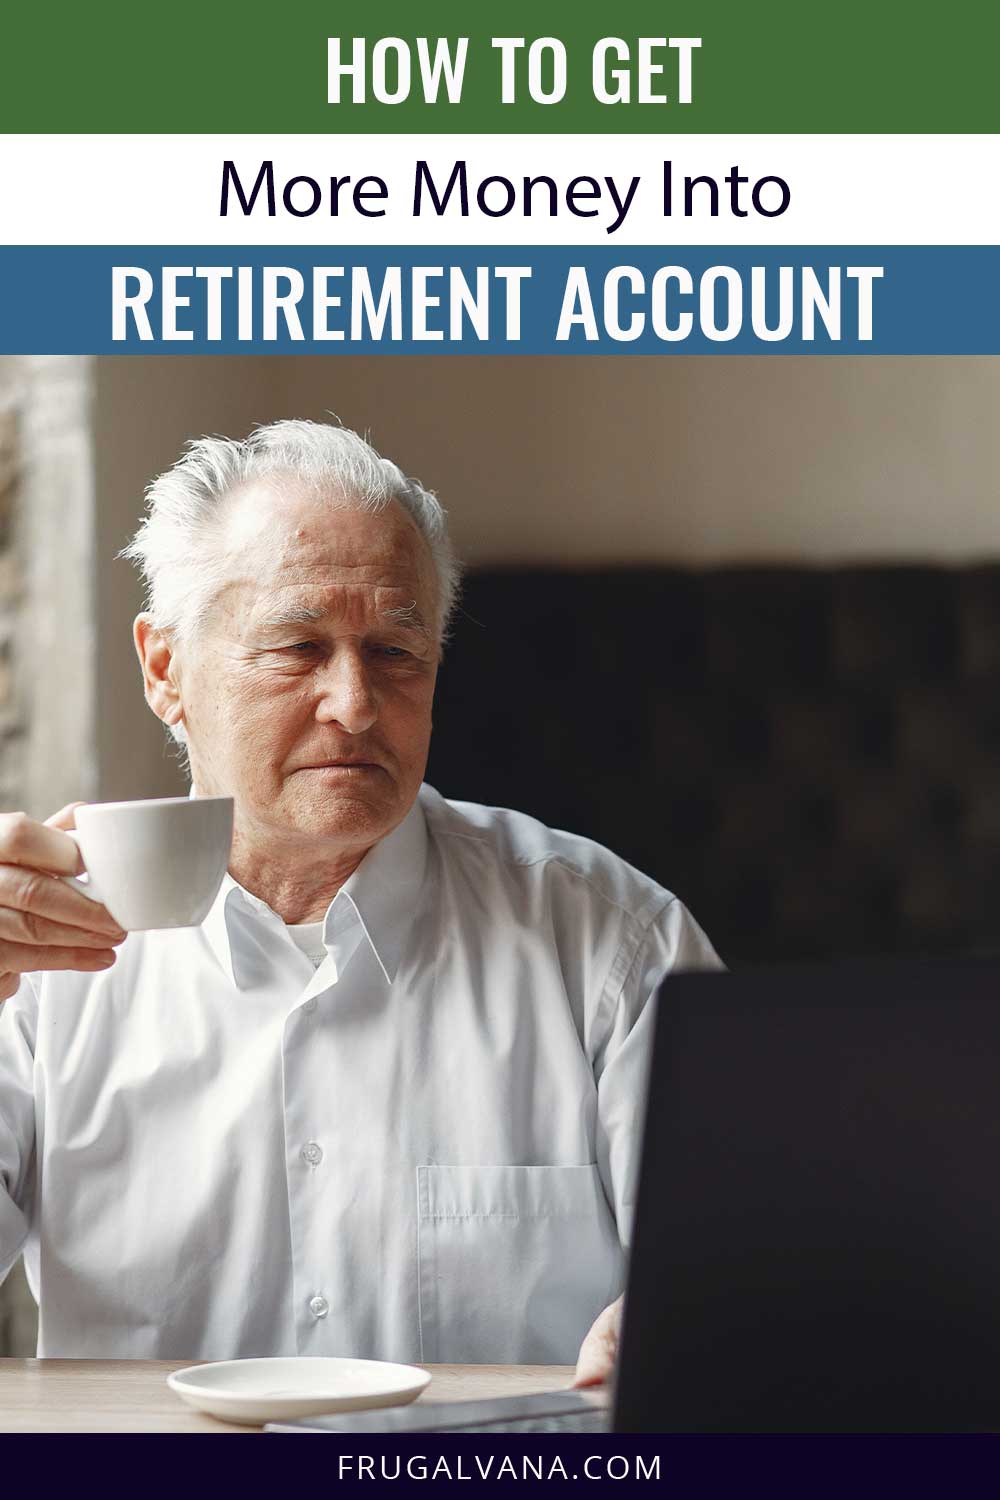 How To Get More Money Into Retirement Account